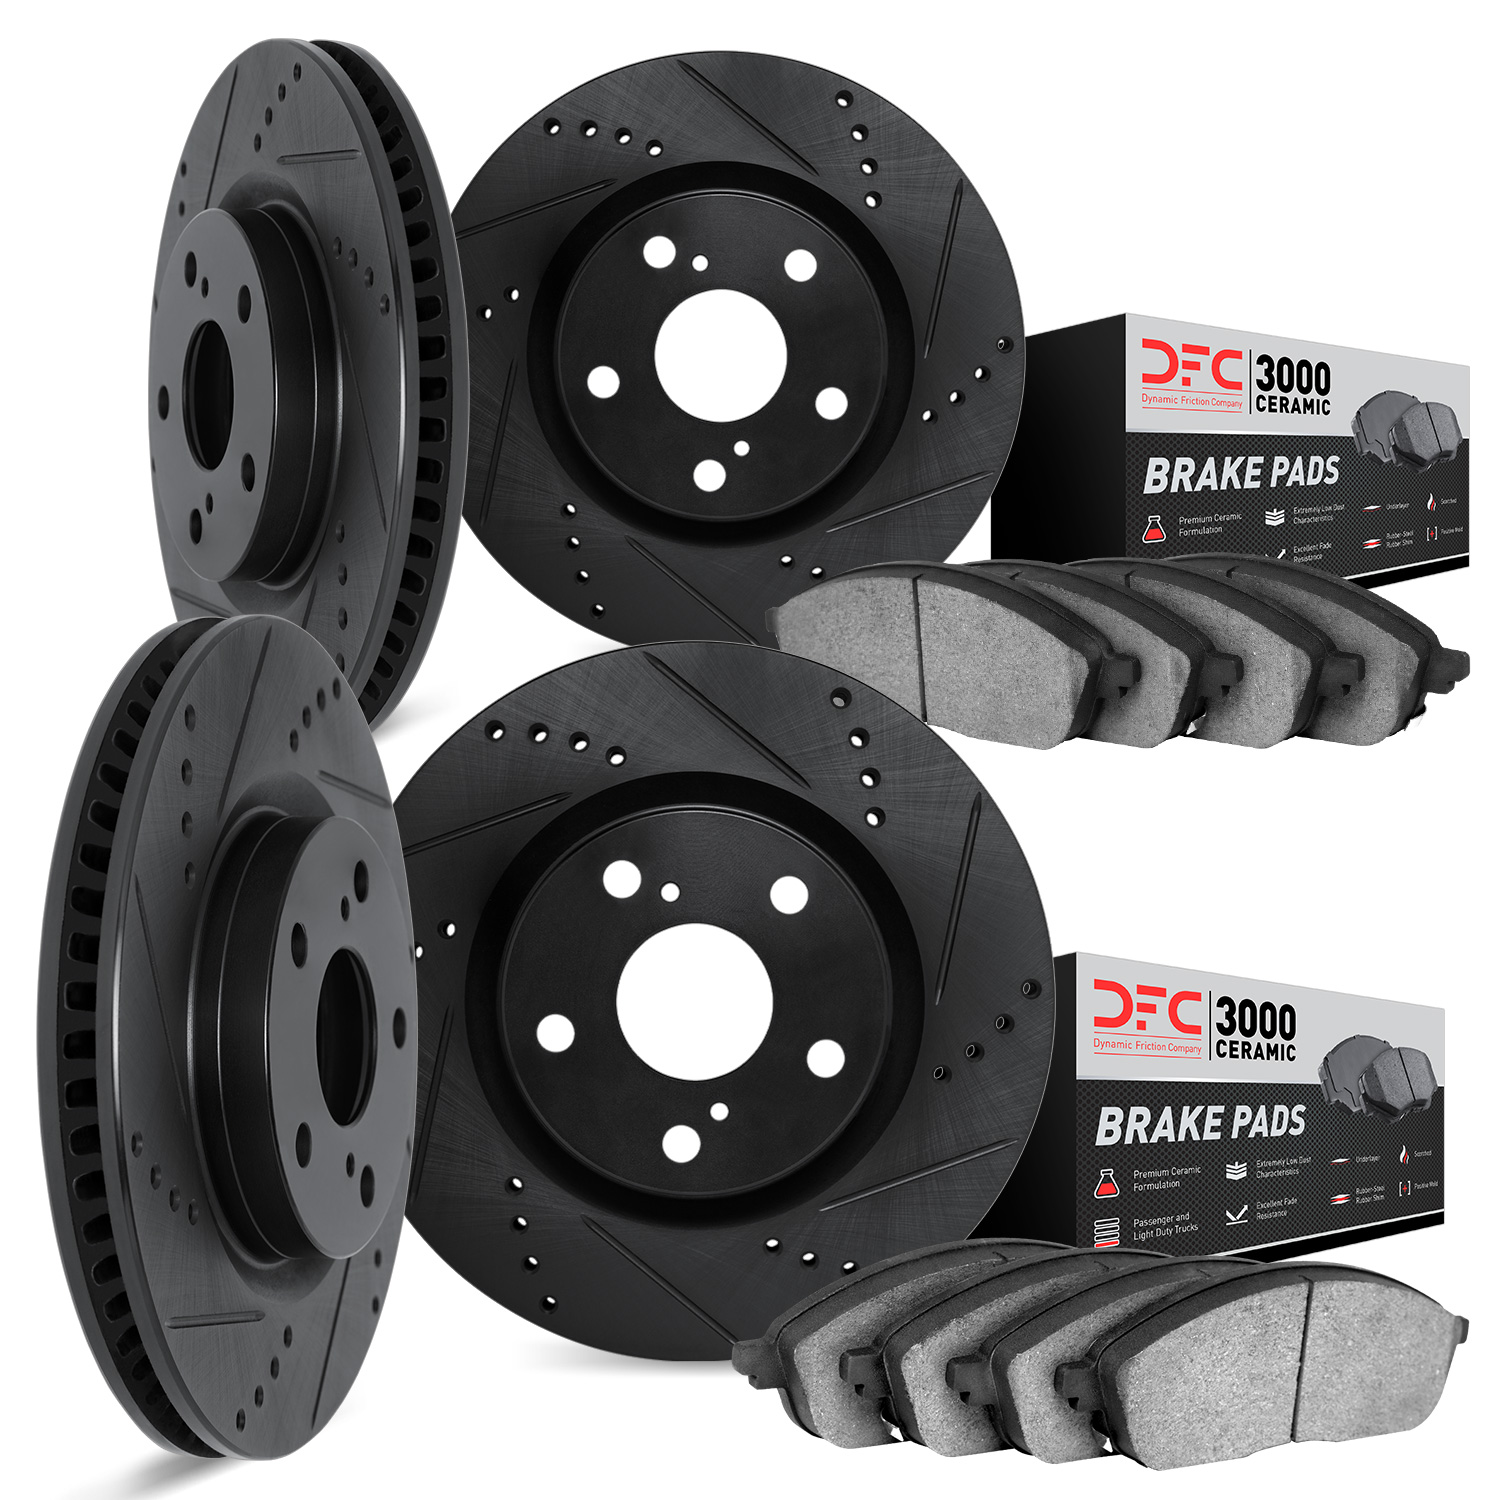 8304-58010 Drilled/Slotted Brake Rotors with 3000-Series Ceramic Brake Pads Kit [Black], 2005-2012 Acura/Honda, Position: Front